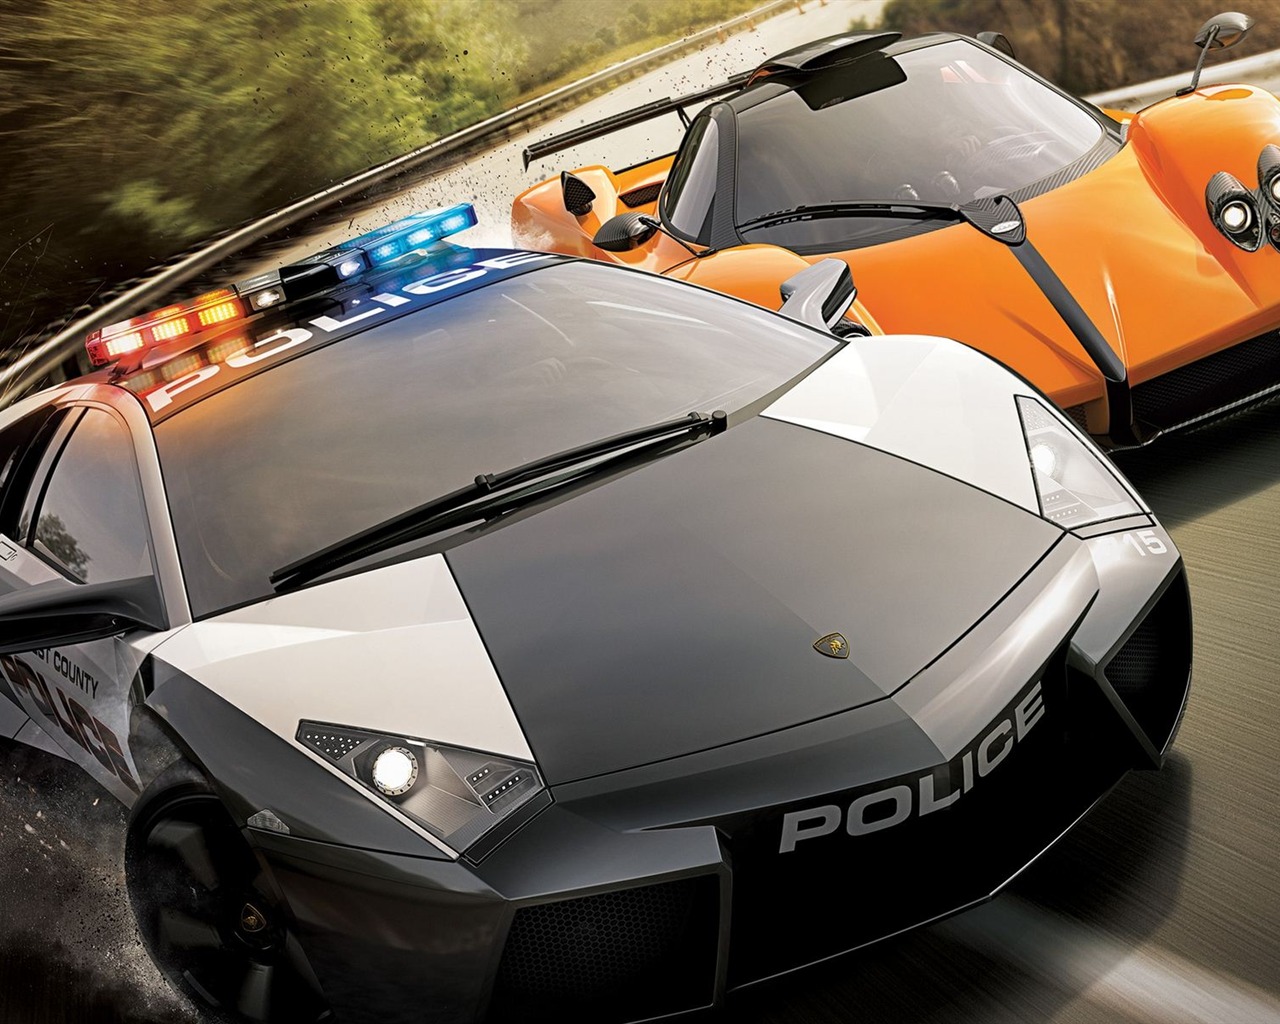 Need for Speed: Hot Pursuit 极品飞车14：热力追踪3 - 1280x1024